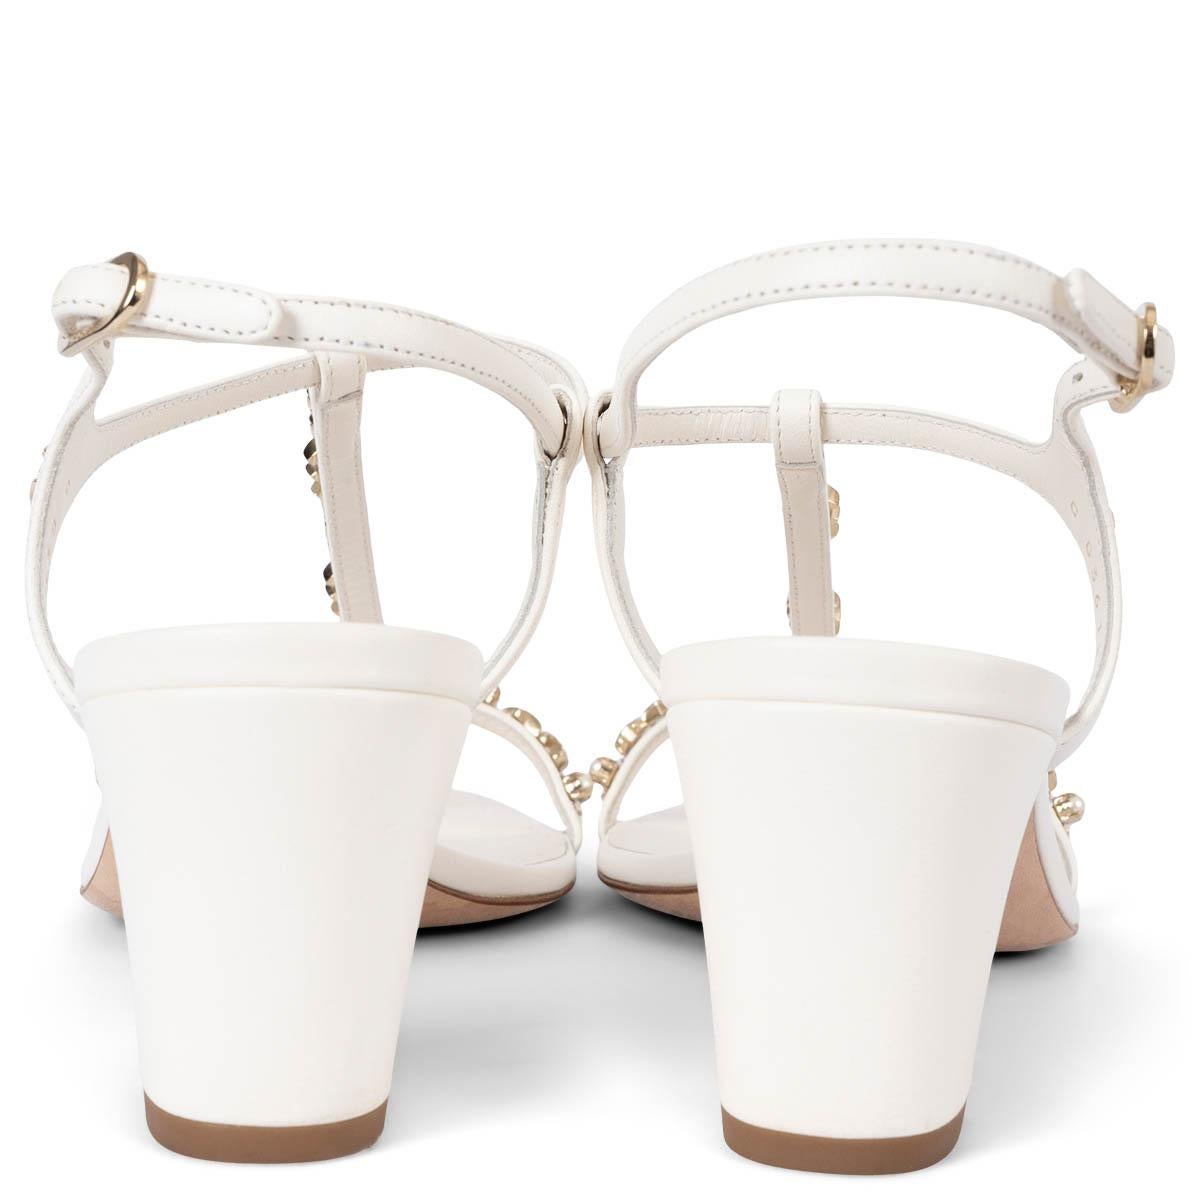 CHANEL white leather 2020 20S PEARL T-STRAP Sandals Shoes 38.5 1